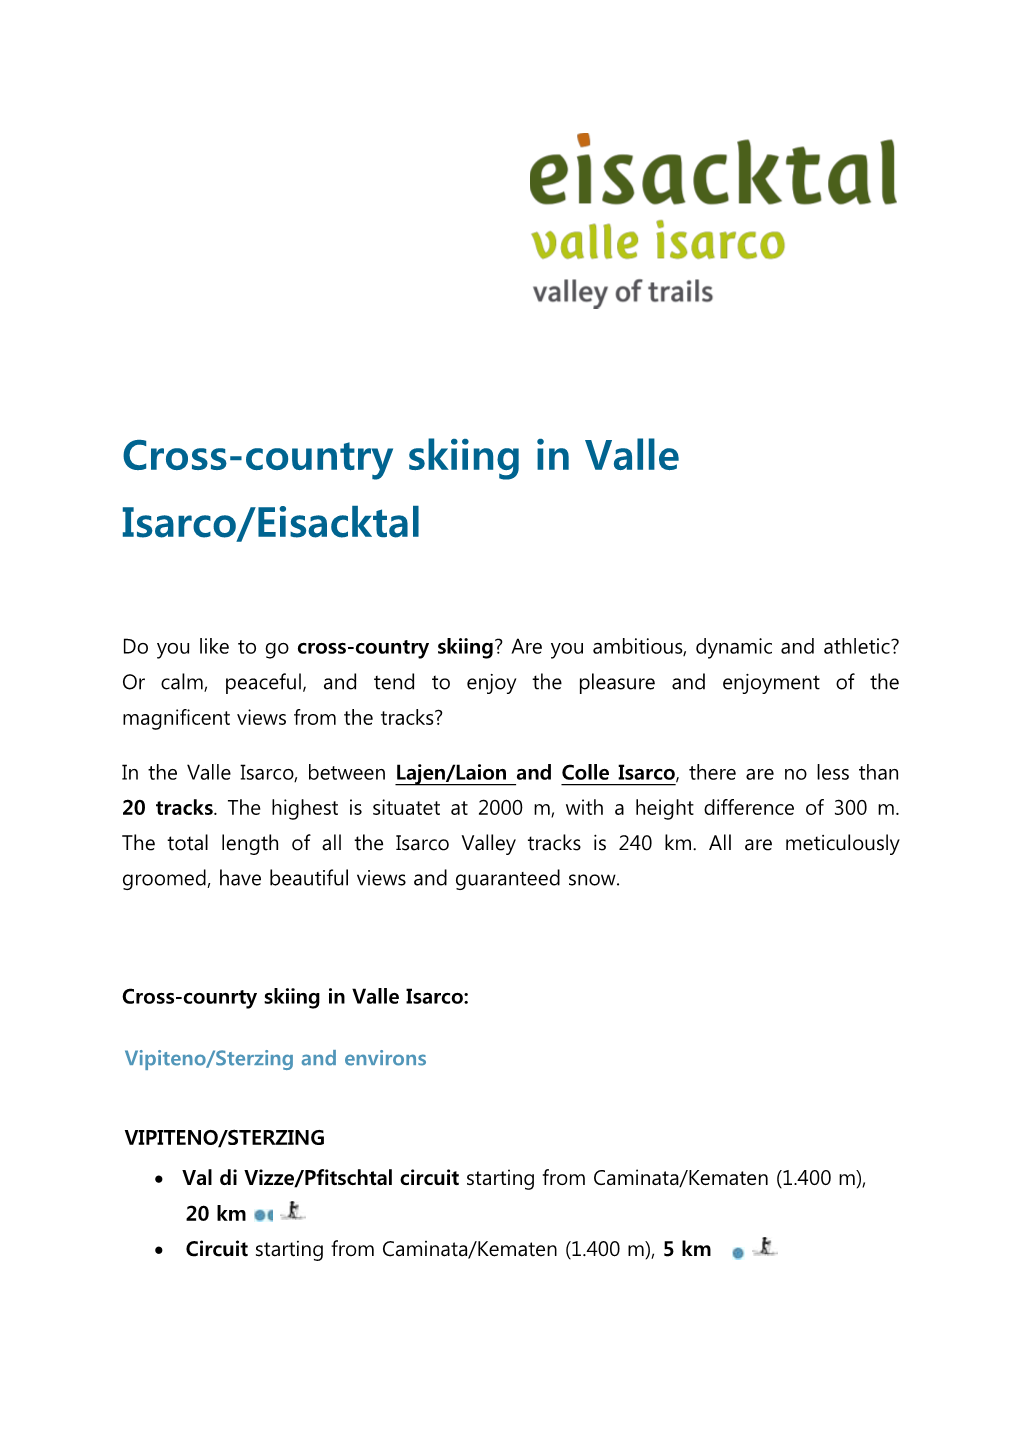 Cross-Country Skiing in Valle Isarco/Eisacktal